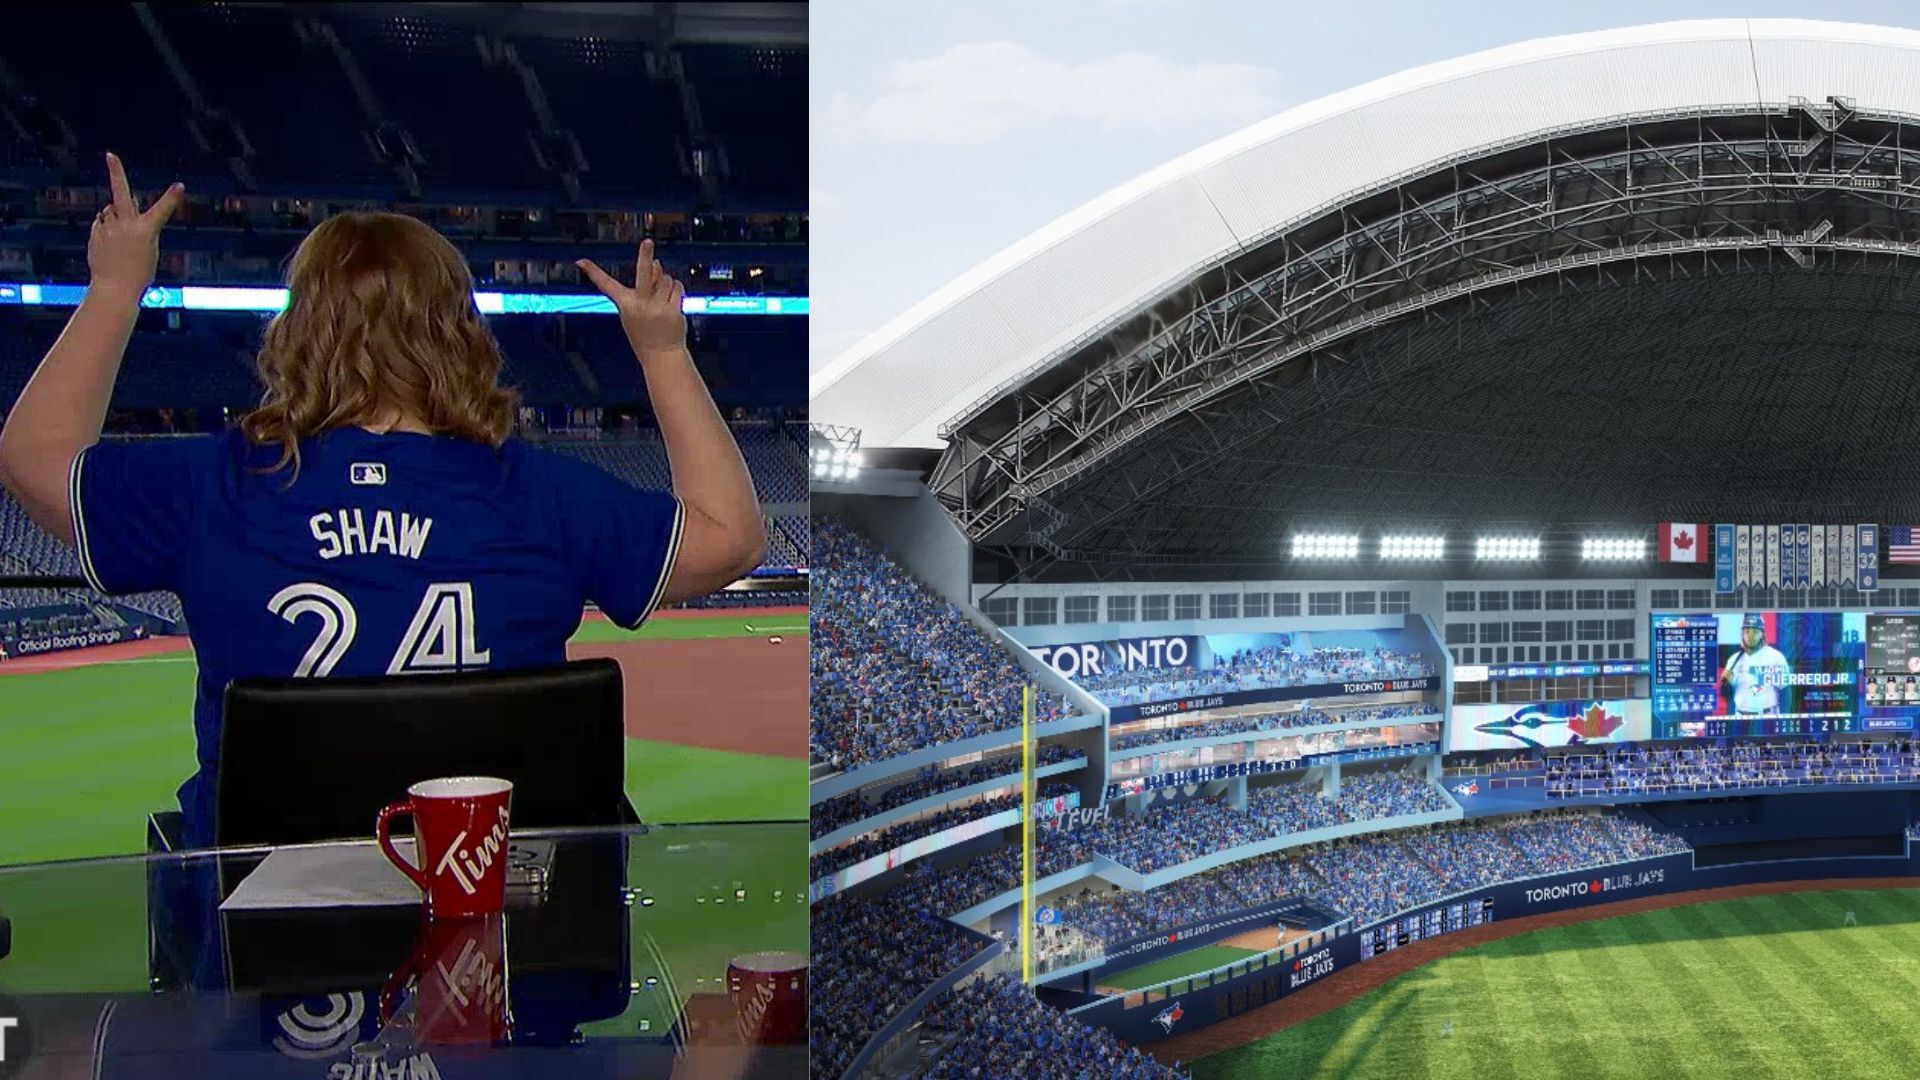 We’re LIVE from the Rogers Centre ahead of the Blue Jays' Home Opener